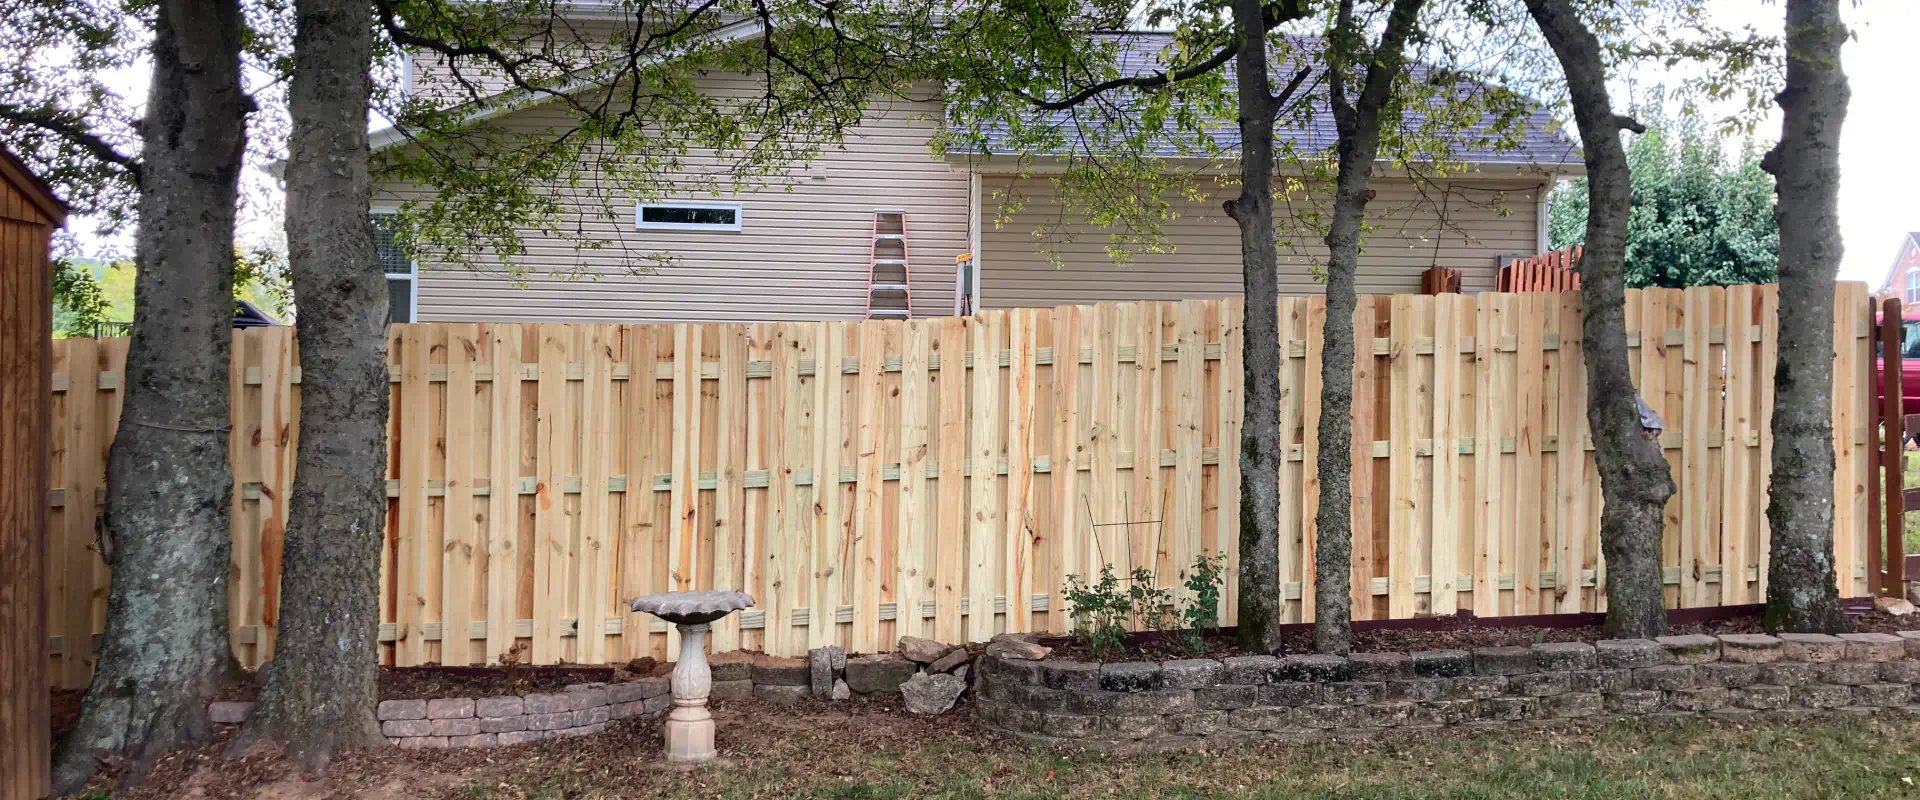 wood fence outside of a beige house with grey roofing and some grass around